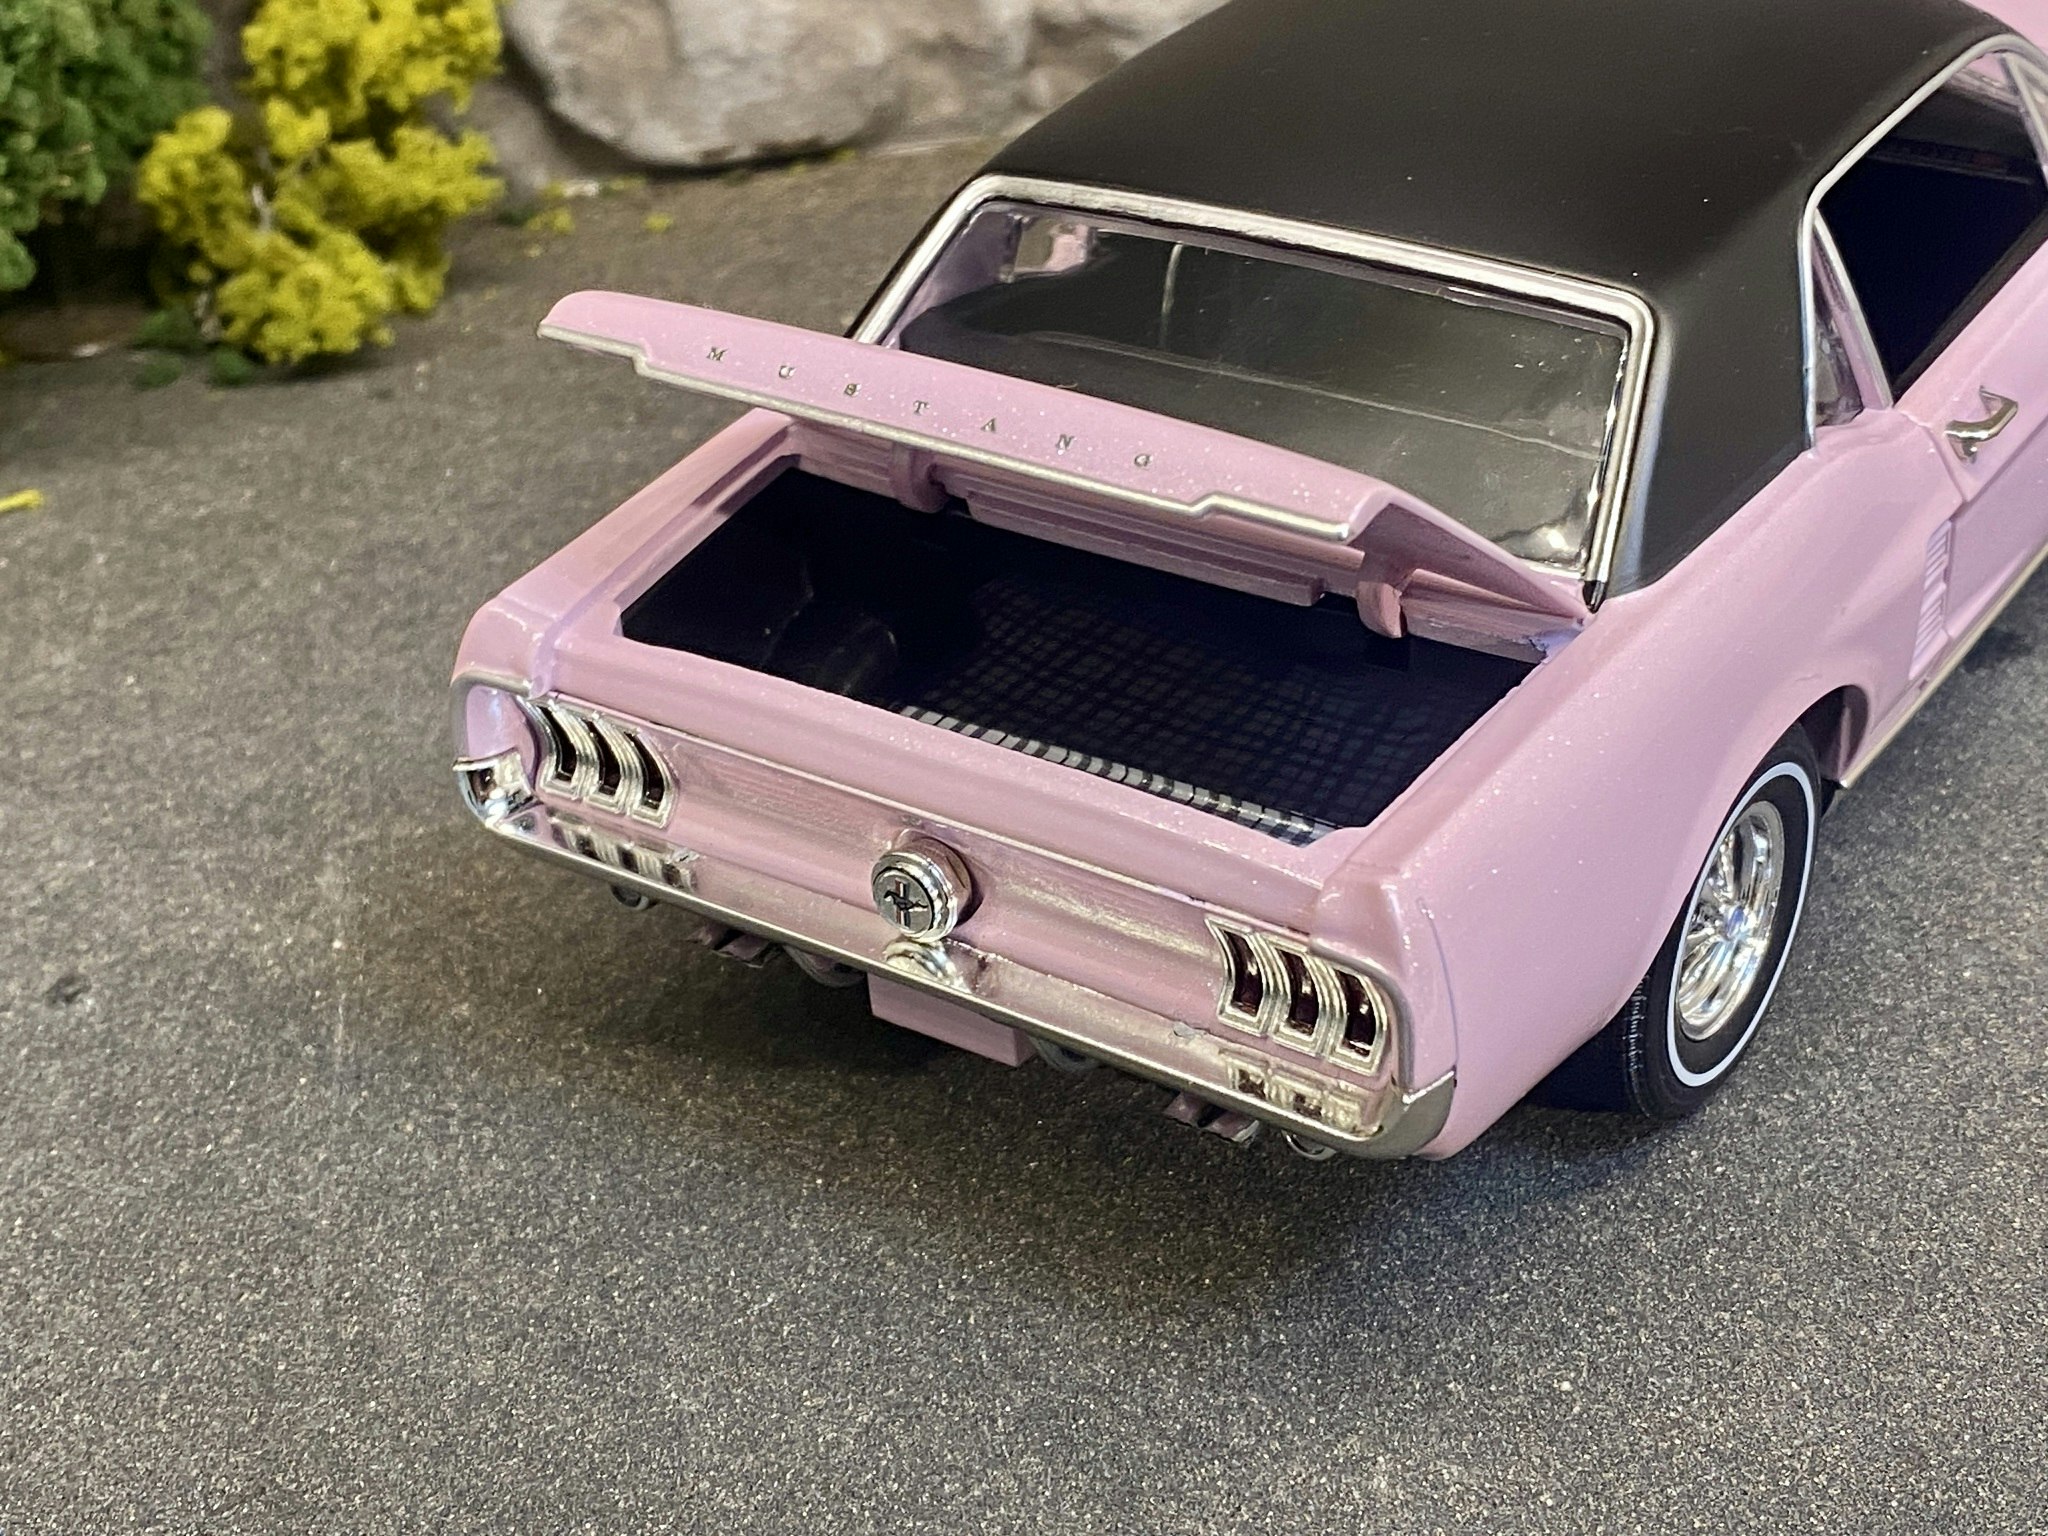 Skala 1/18 1967 Ford Mustang Coupe, Evening Orchid fr Greenlight